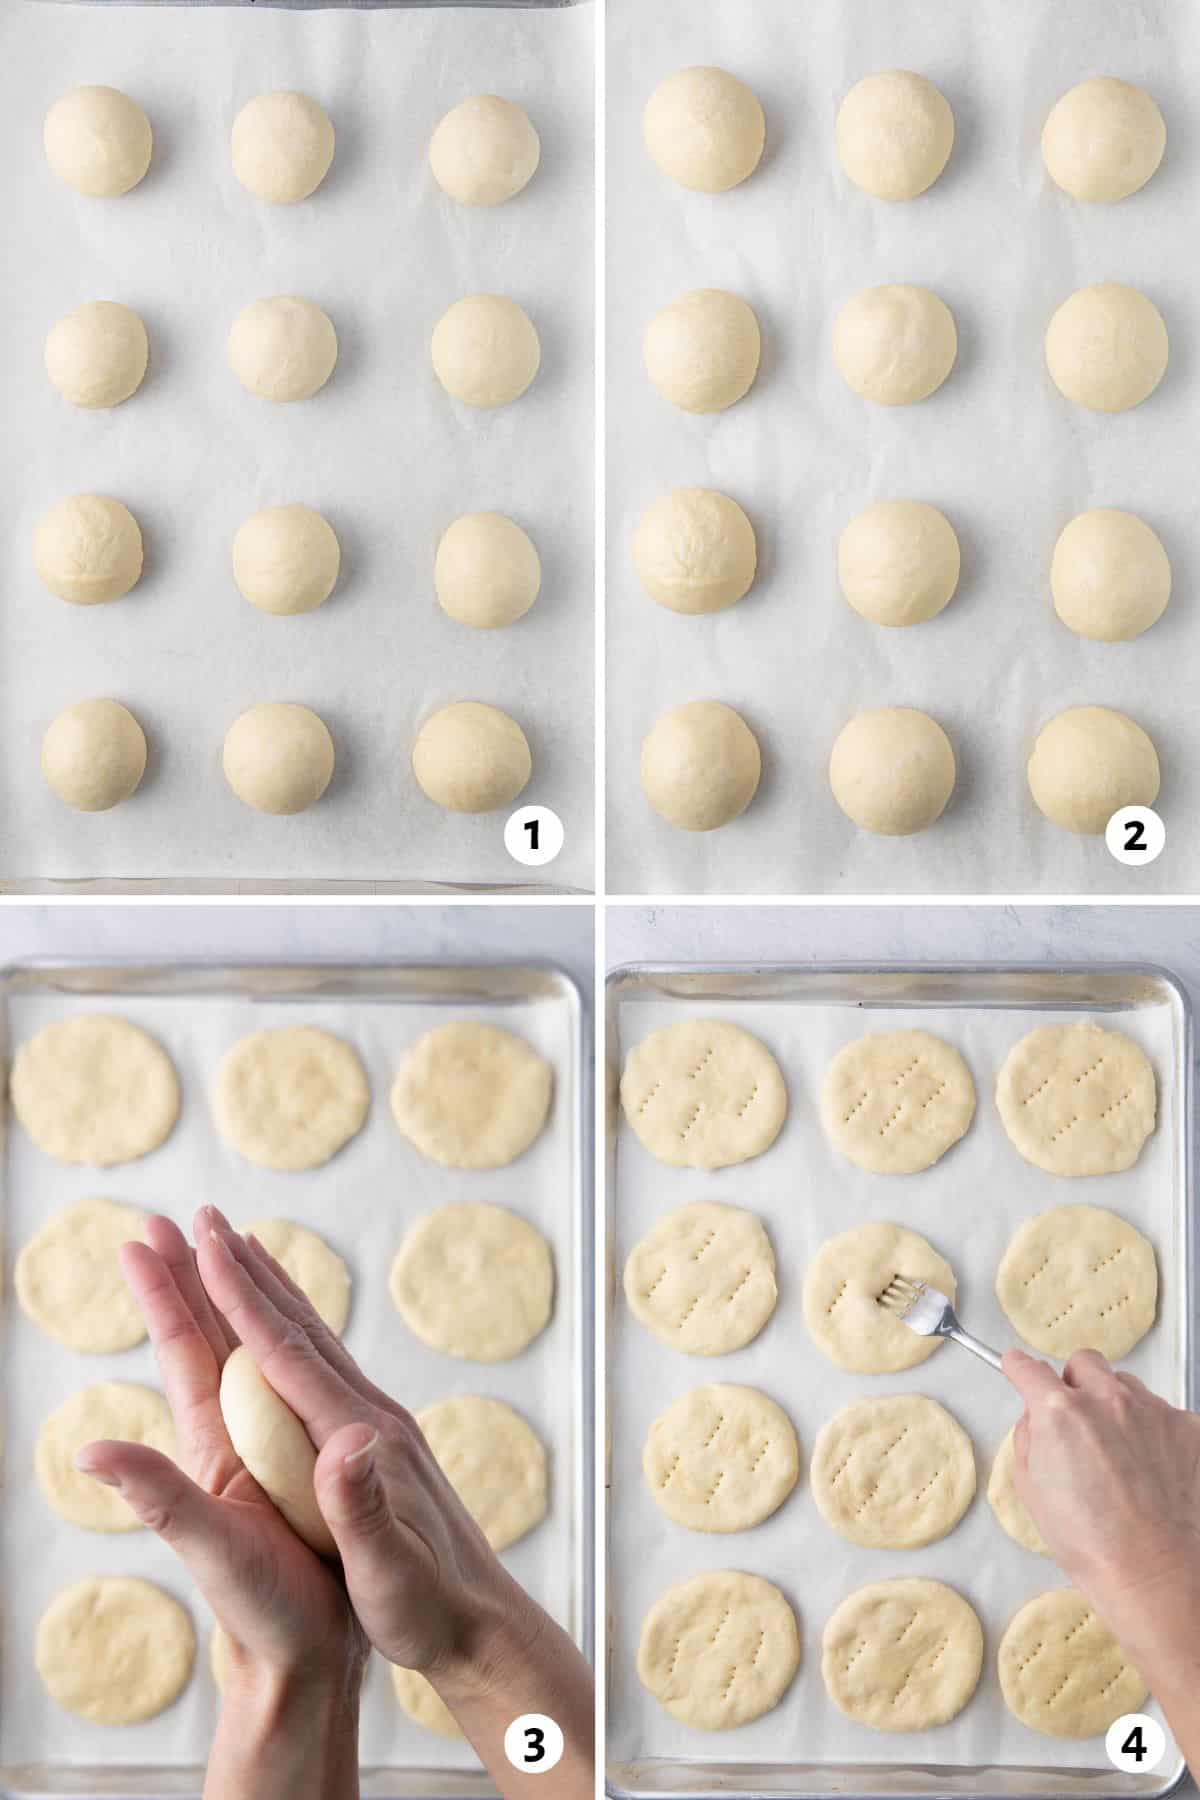 4 image collage making recipe: 1- 12 dough balls on a baking sheet lined with parchment paper, 2- after resting to show slightly larger, 3- hand pressing a dough ball flat in between palms, 4- flattened dough balls on baking sheet with a hand using piercing them with a fork.